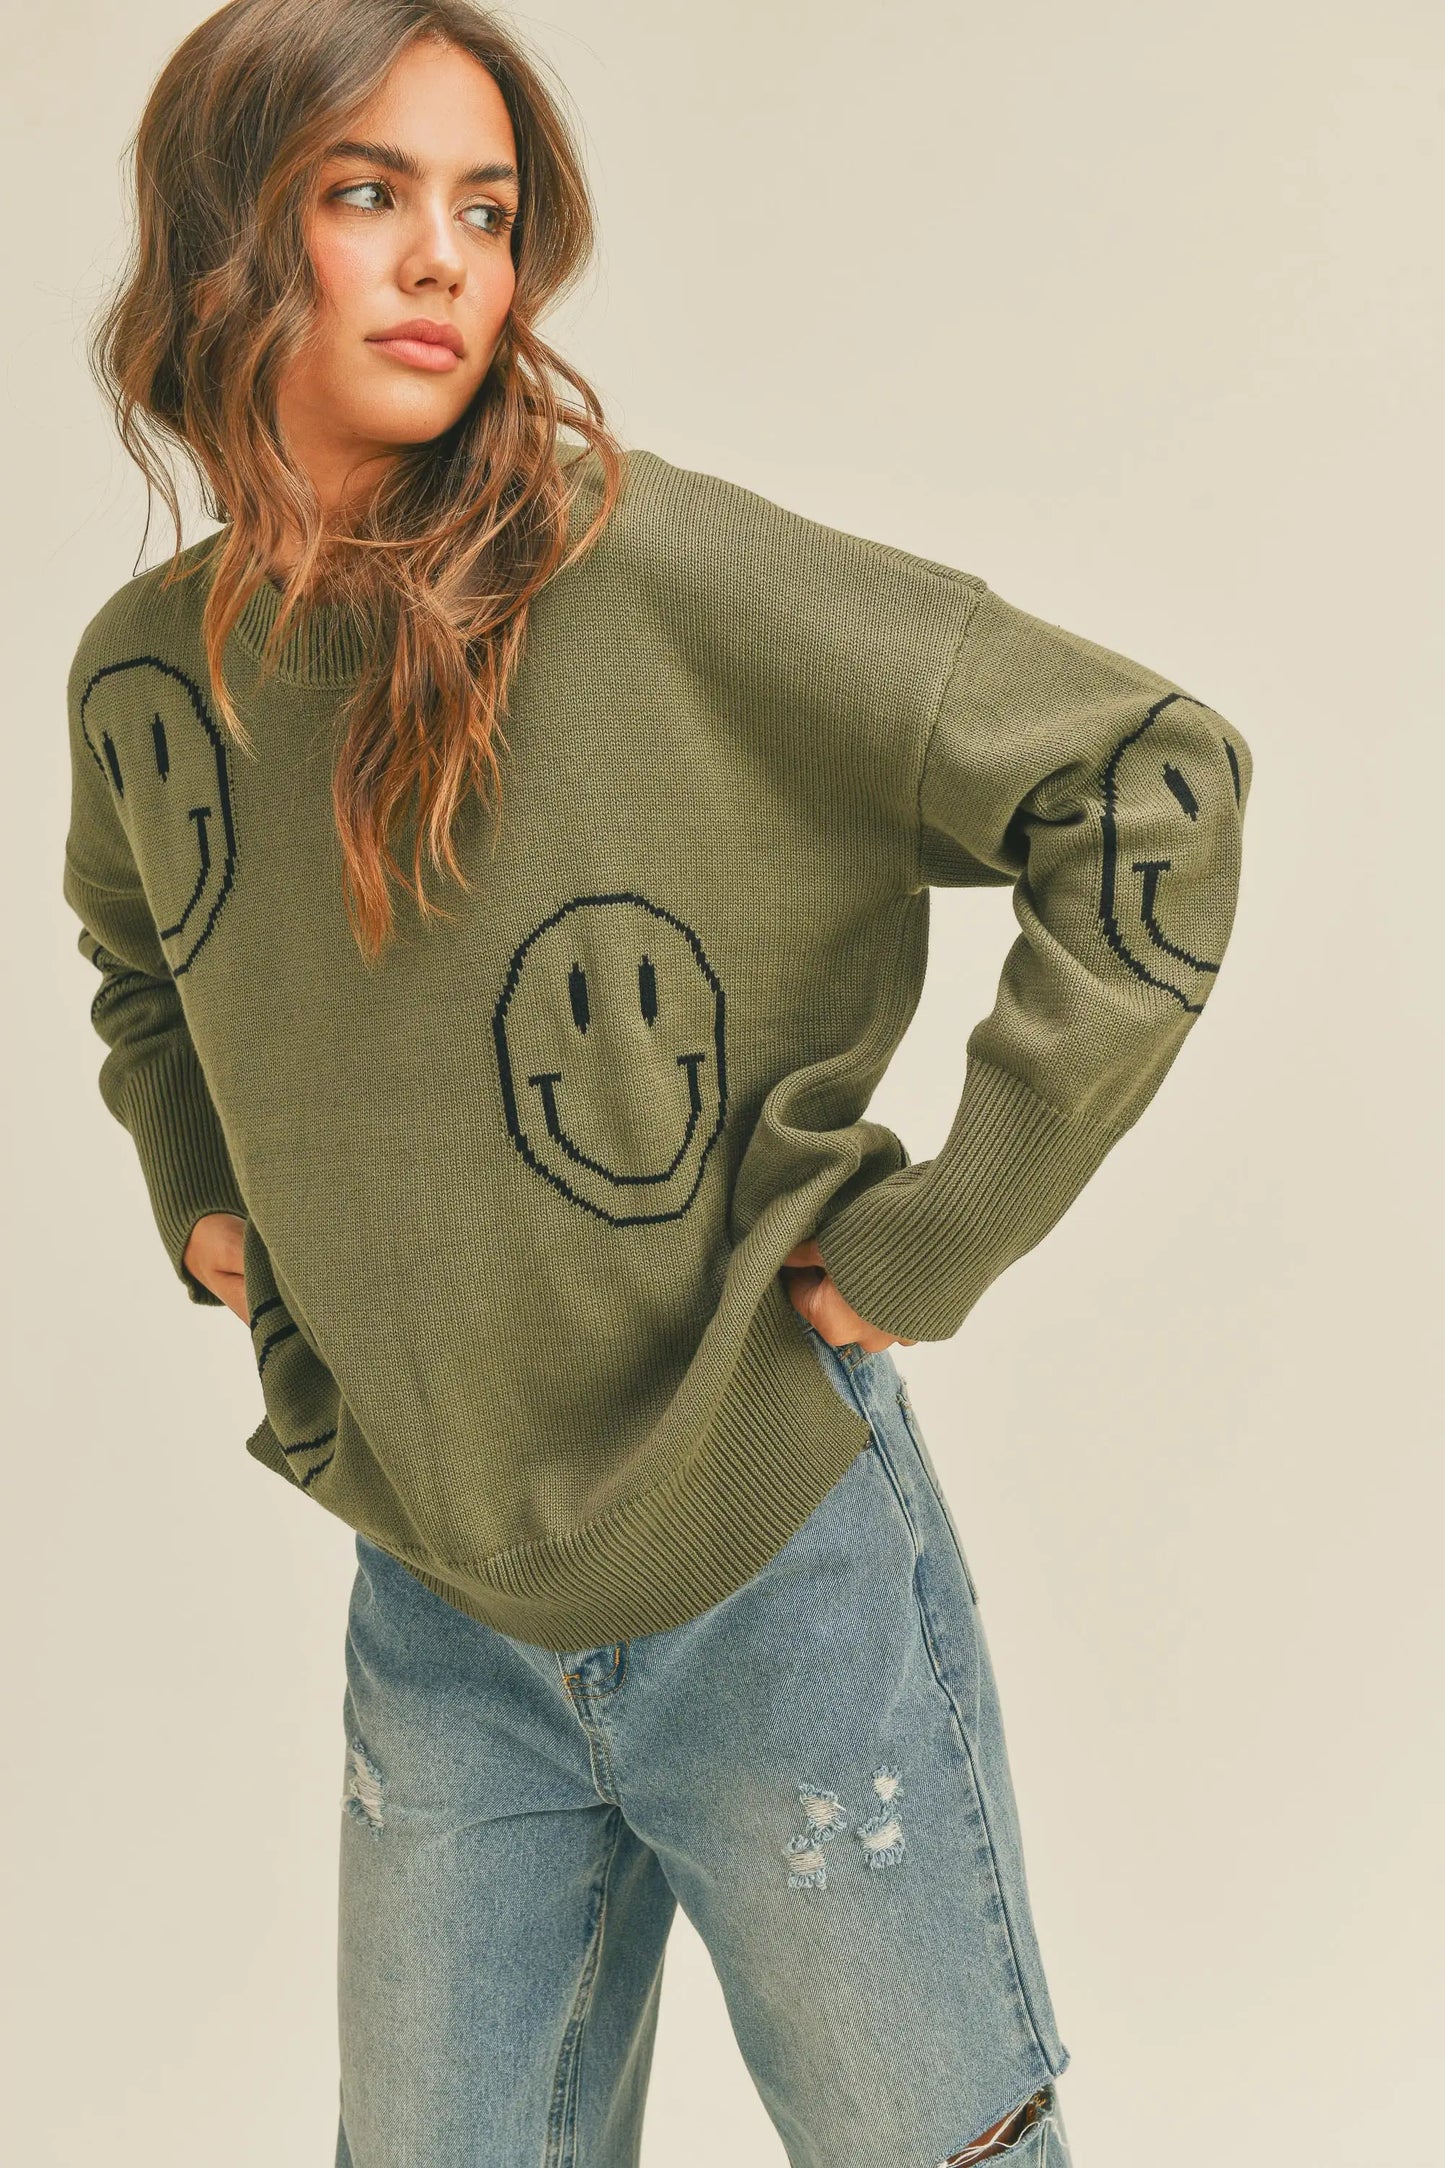 The Smiley Sweater